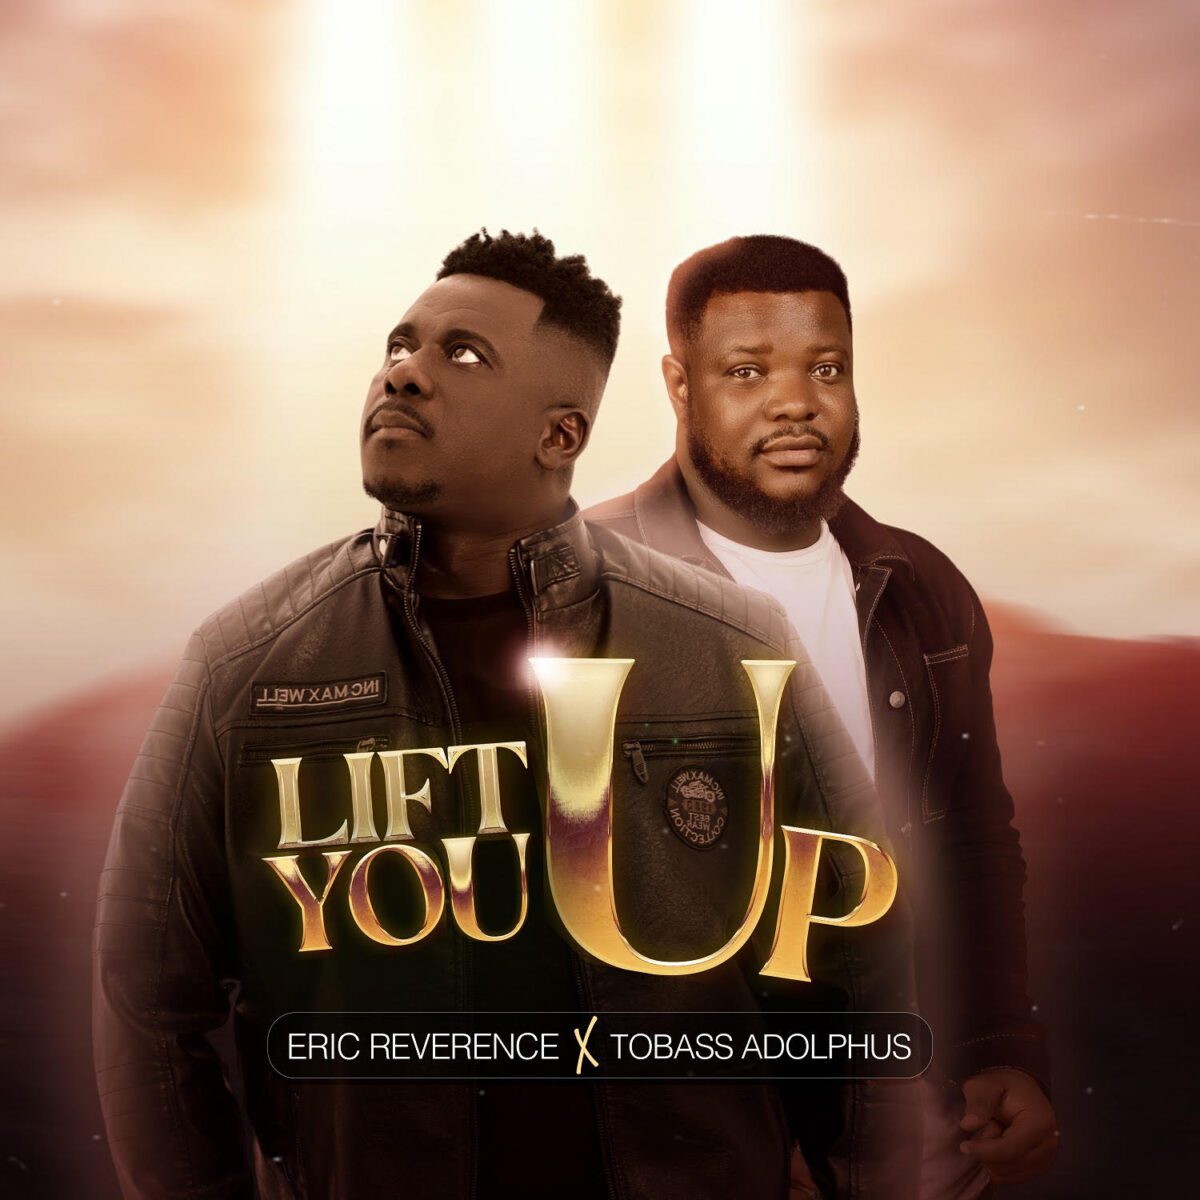 TMAQTALK MUSIC : Eric Reverence - Lift You Up Ft. Tobass Adolphus 6